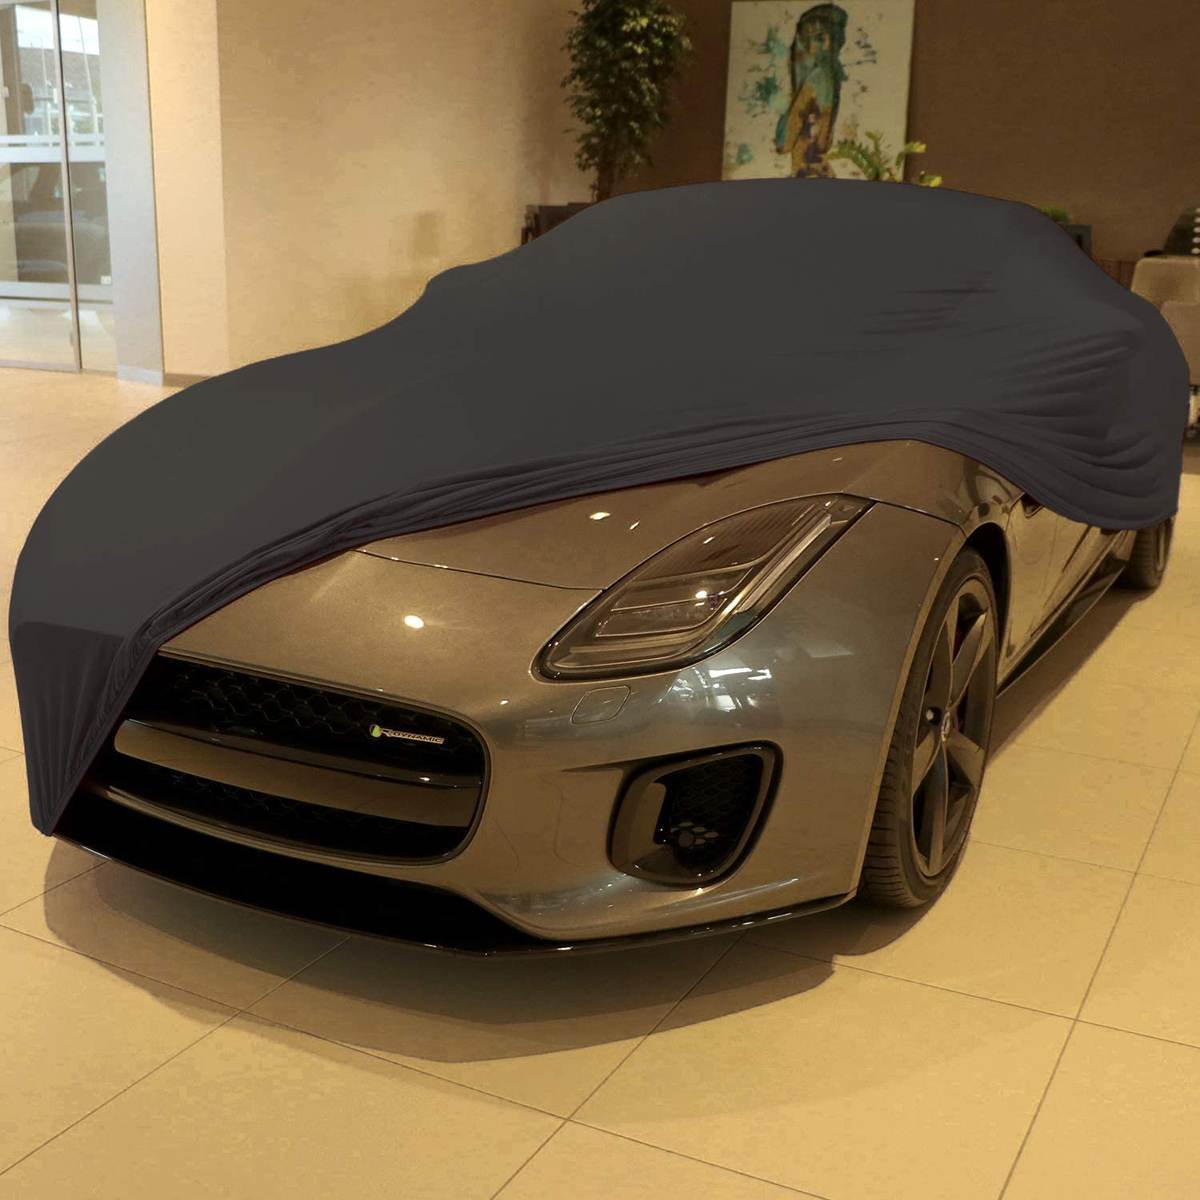 Universal Car Soft stretch Cover Outdoor Full Auot Cover Sun UV Snow Dust Resistant Protection Cover for sports cars SUV ect